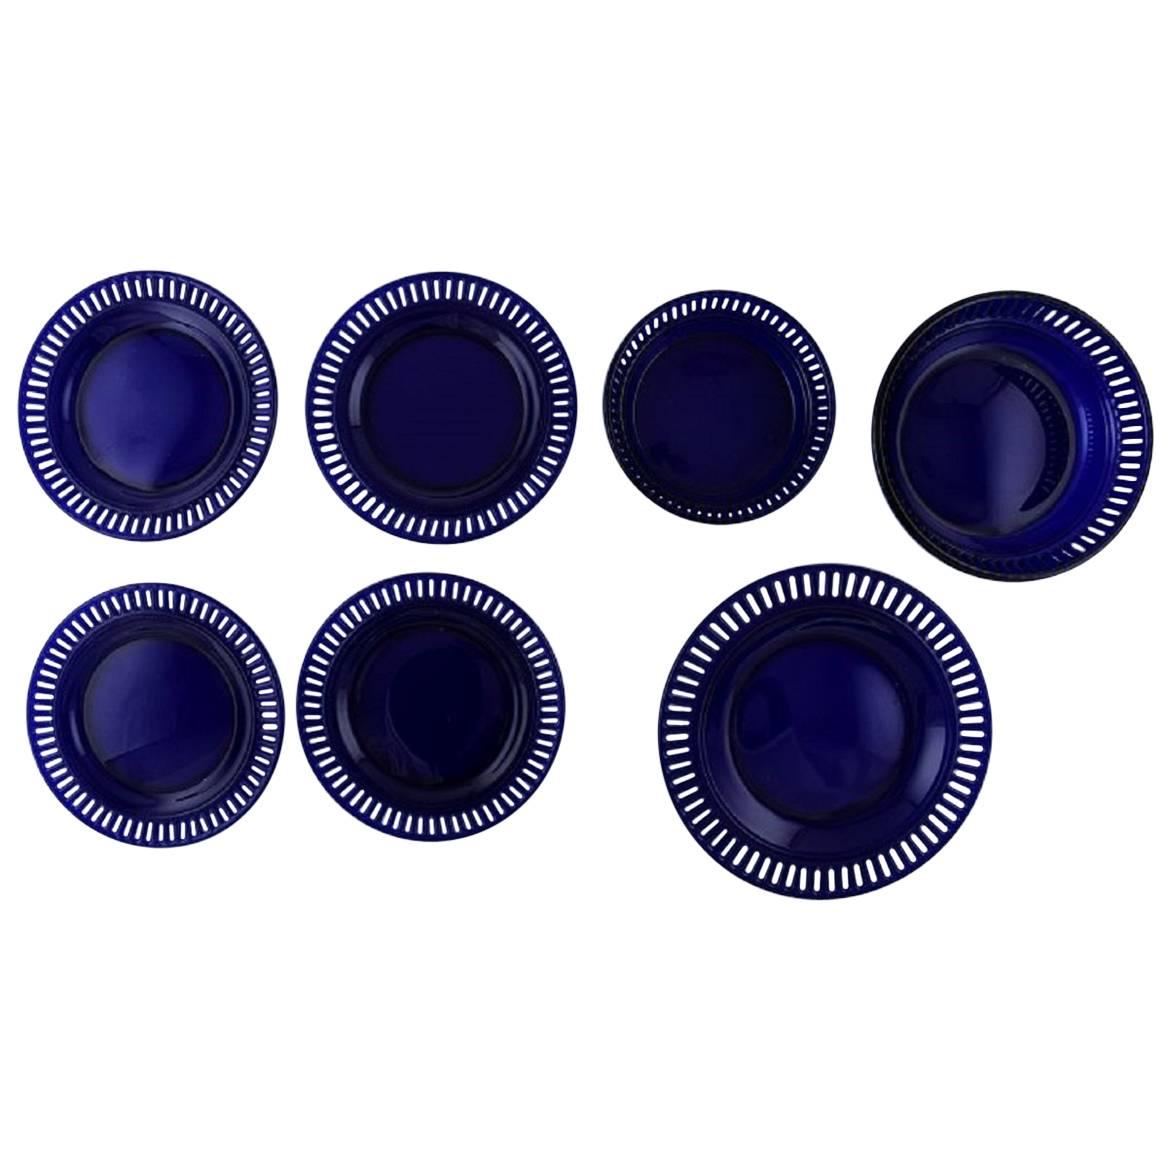 William Steberg for Gullaskuf, Seven Plates and Bowls in Dark Blue Art Glass For Sale